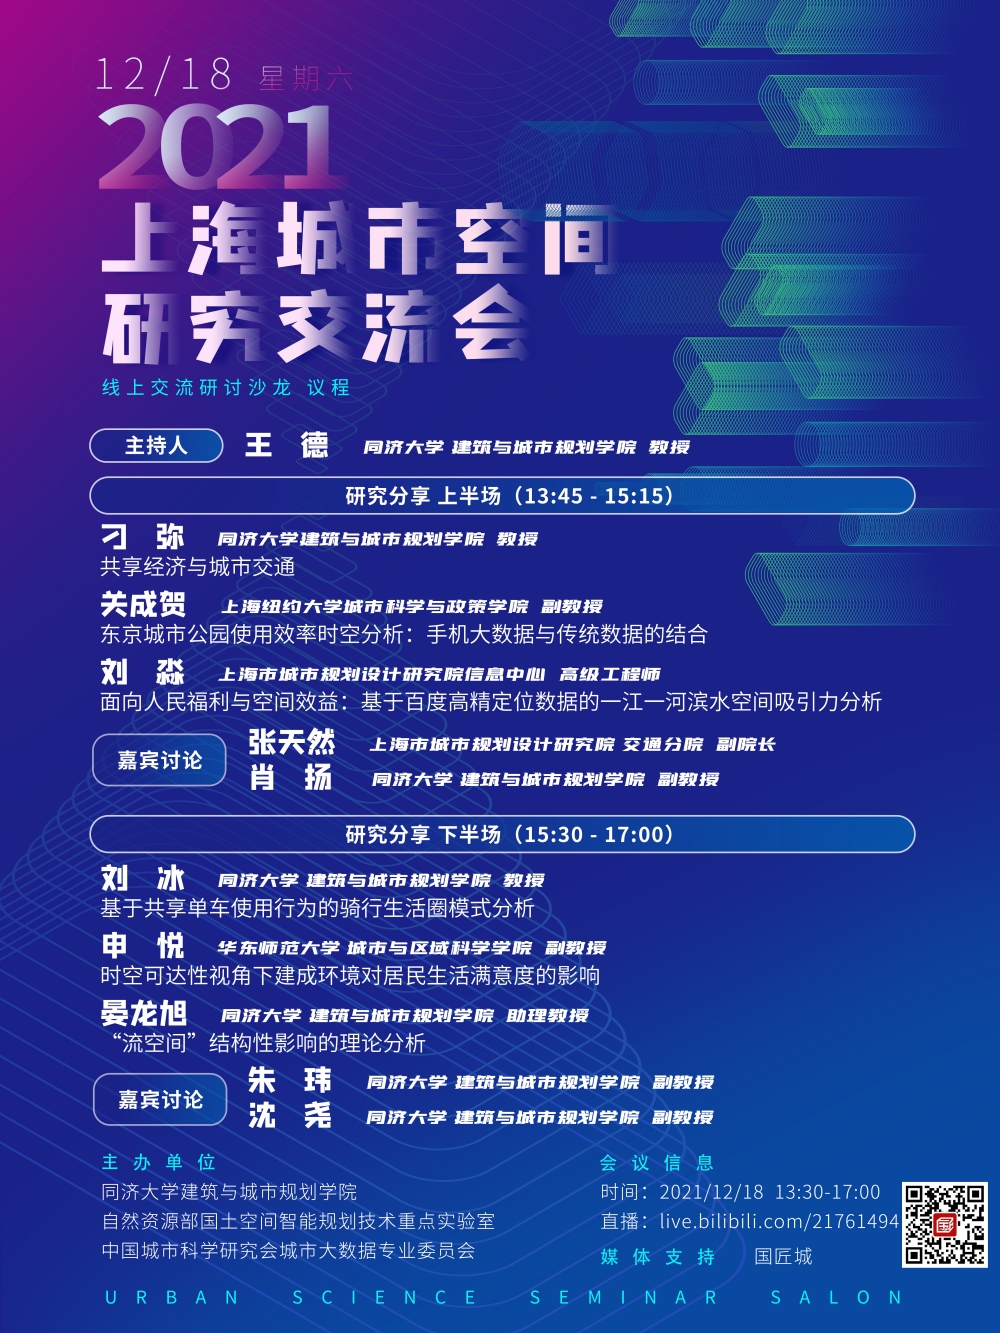 Conference Live: Shanghai Urban Space Research Symposium